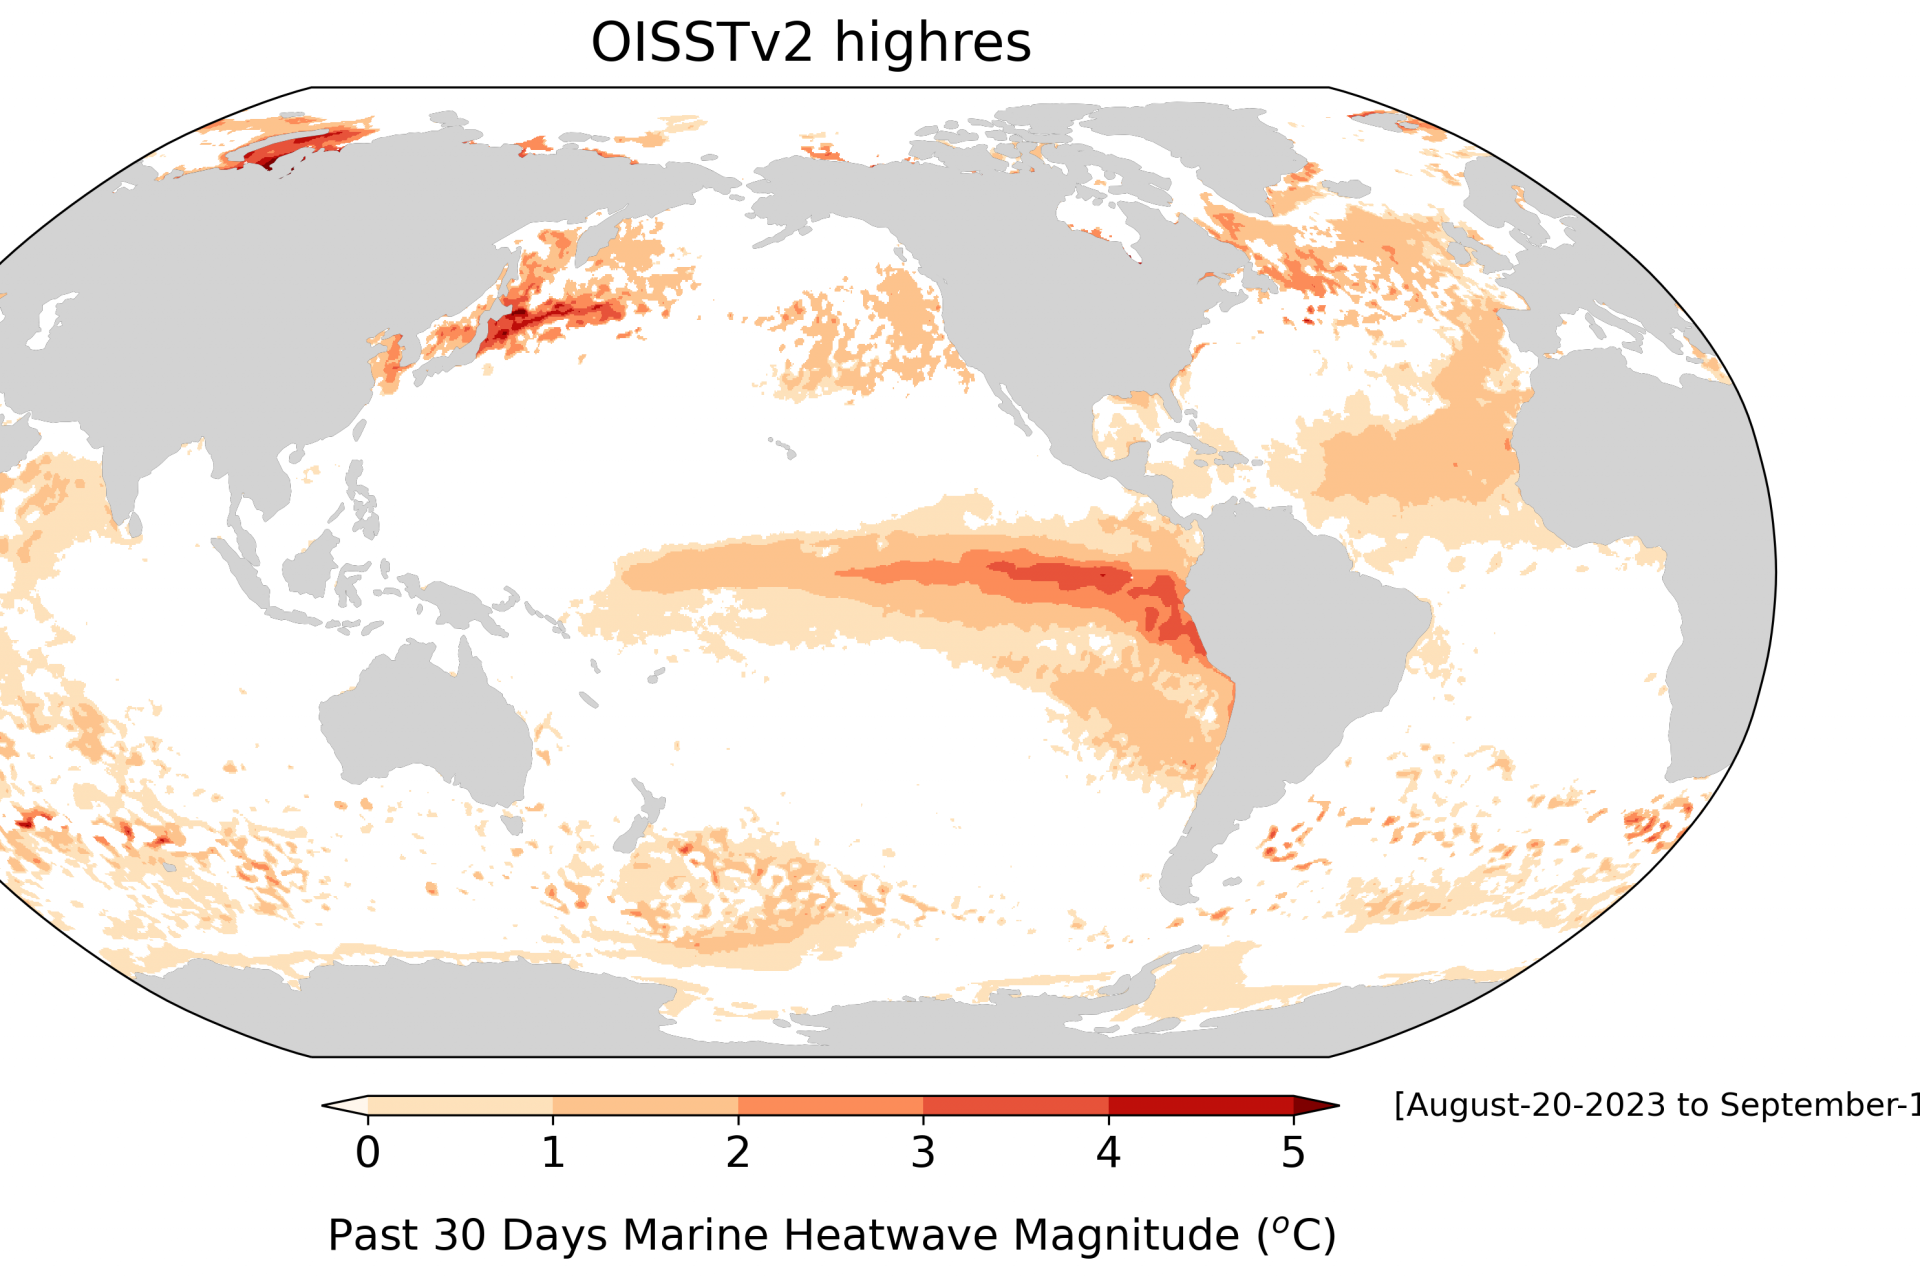 Warmer waters and an event known as The Blob 